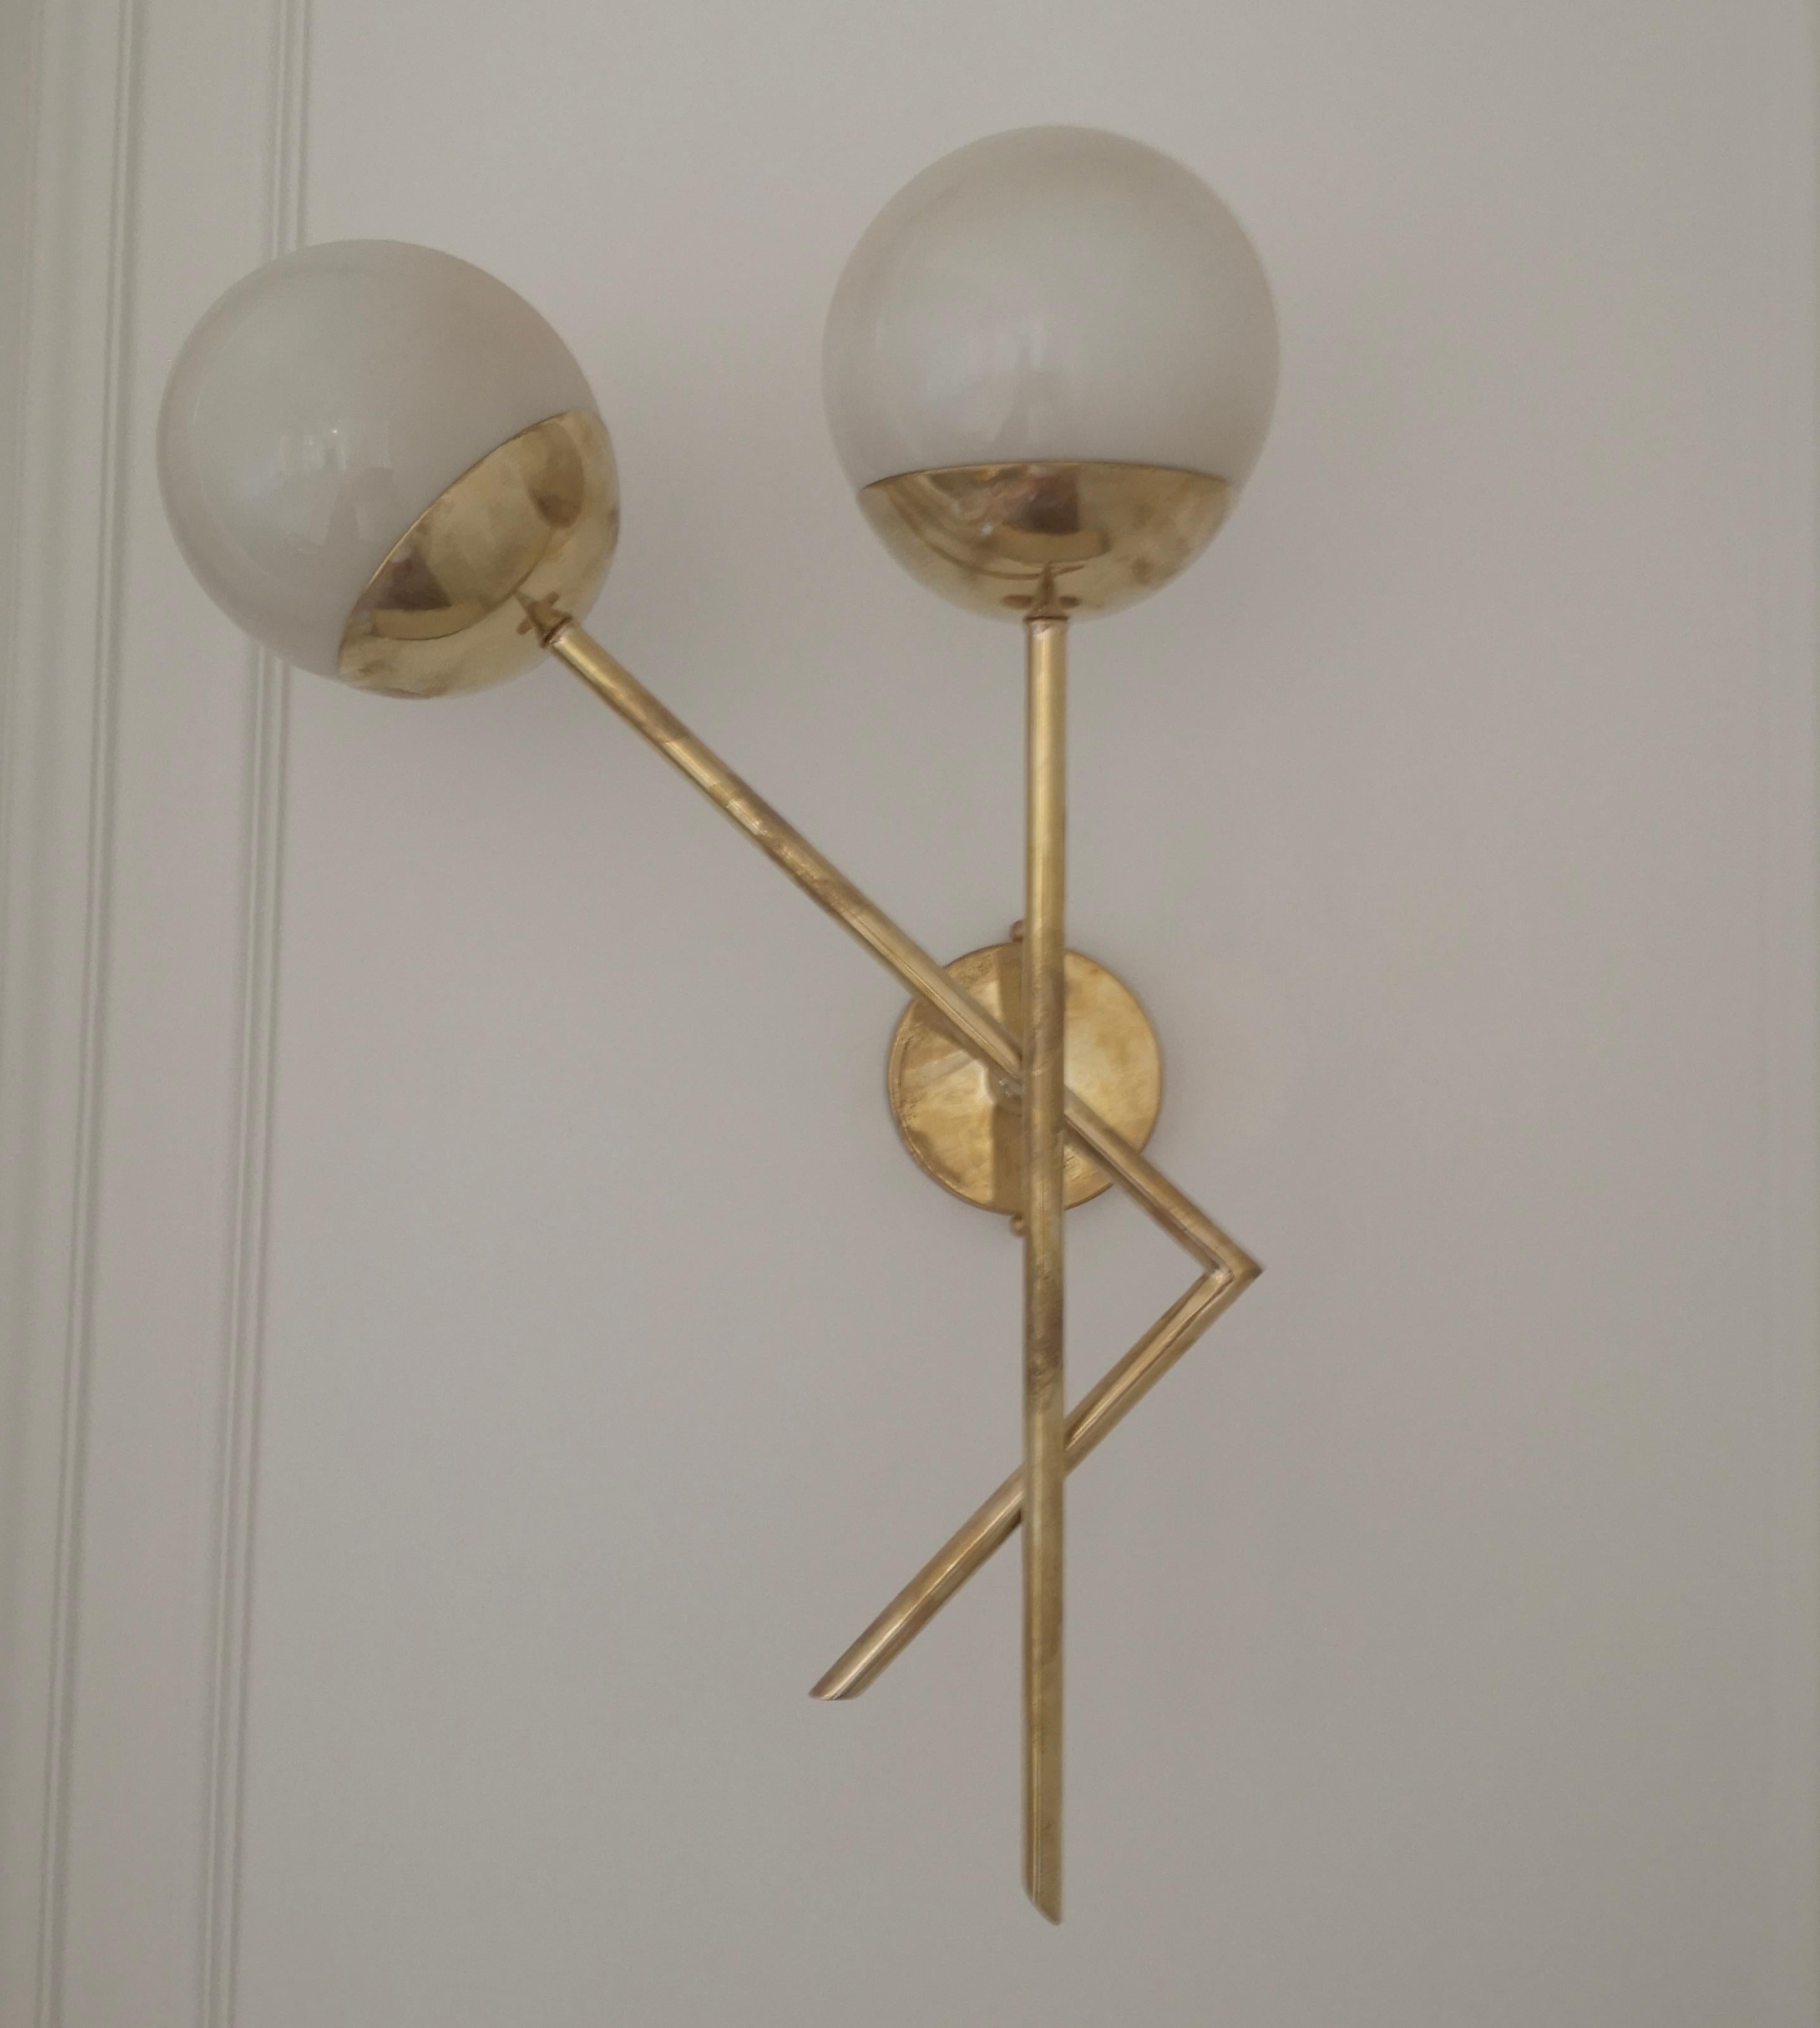 Refined and delicate design for this wall light with cream color Murano glass.

The applique are made up of a brass structure that allows the housing of a beautiful cream color Murano glass sphere. The design is very clean and simple, but at the